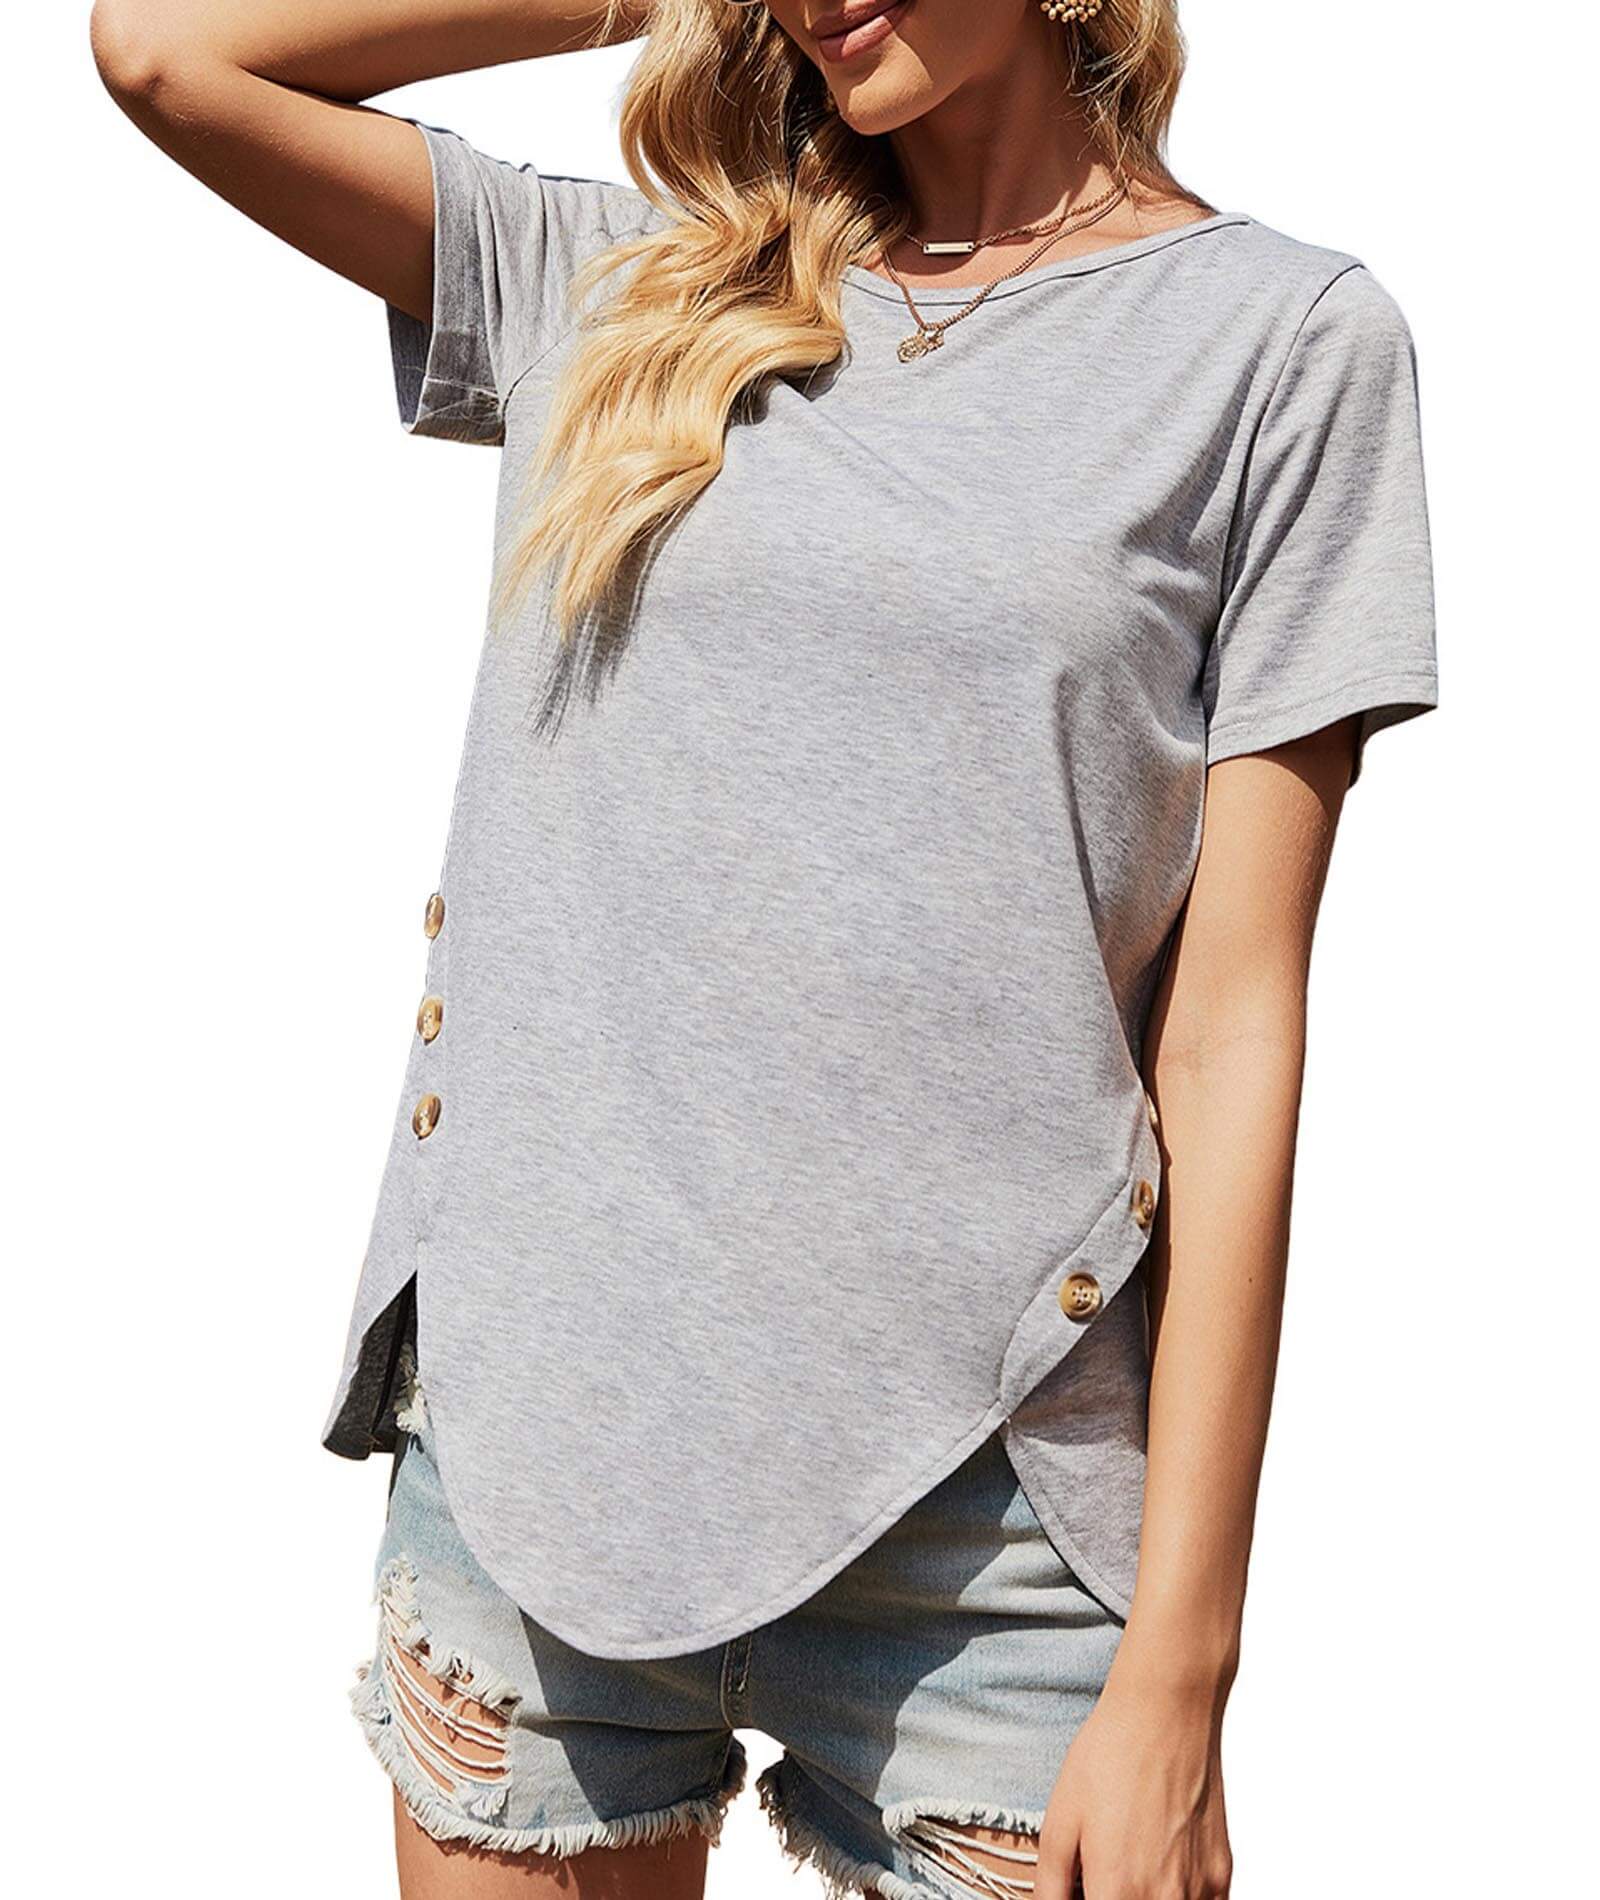  Women's Casual Irregular Tulip Hem T Shirts Round Neck Short Sleeve Tunic Tops Side Button Solid Loose Tee Blouses